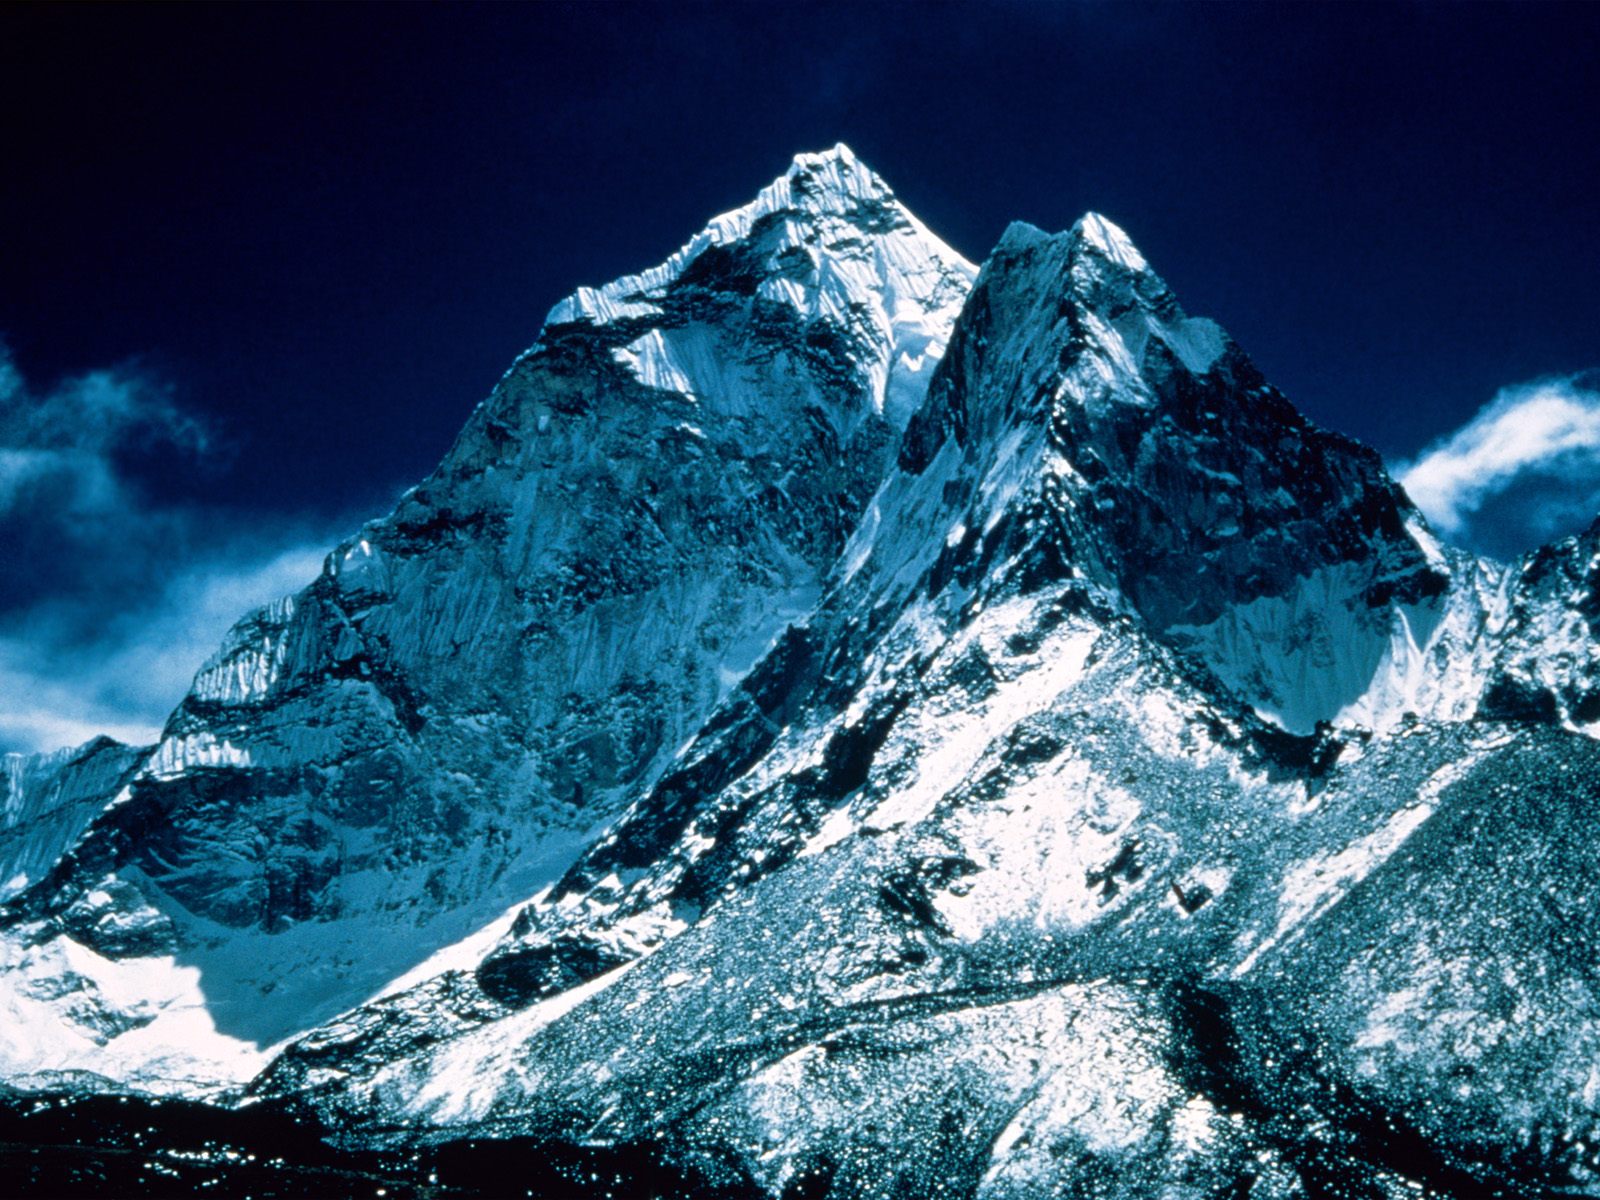 Mount Everest: The Majestic Roof of the World